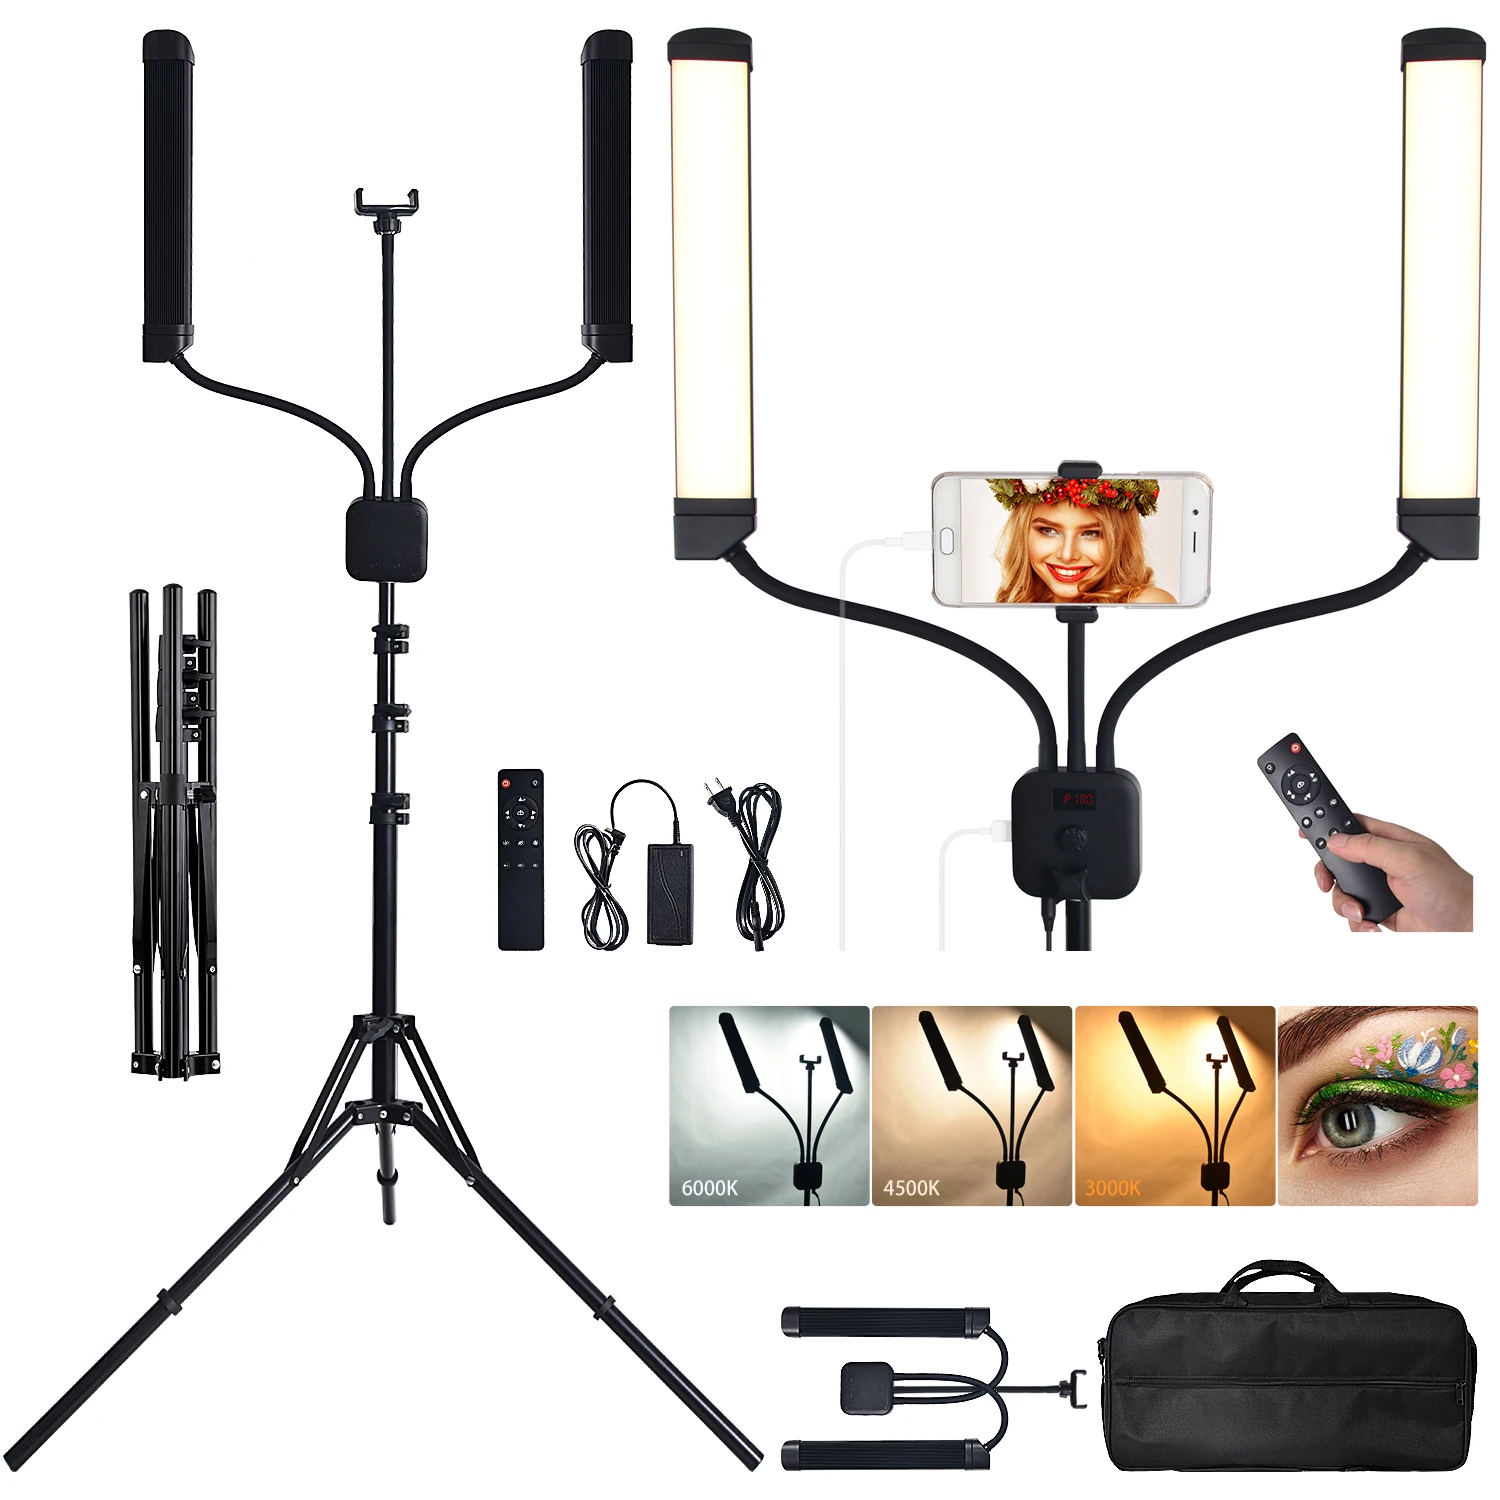 

fosoto Multimedia Extreme With Selfie Function photographic Lighting Led Video light Lamp Ring With Tripod For Makeup Youtube